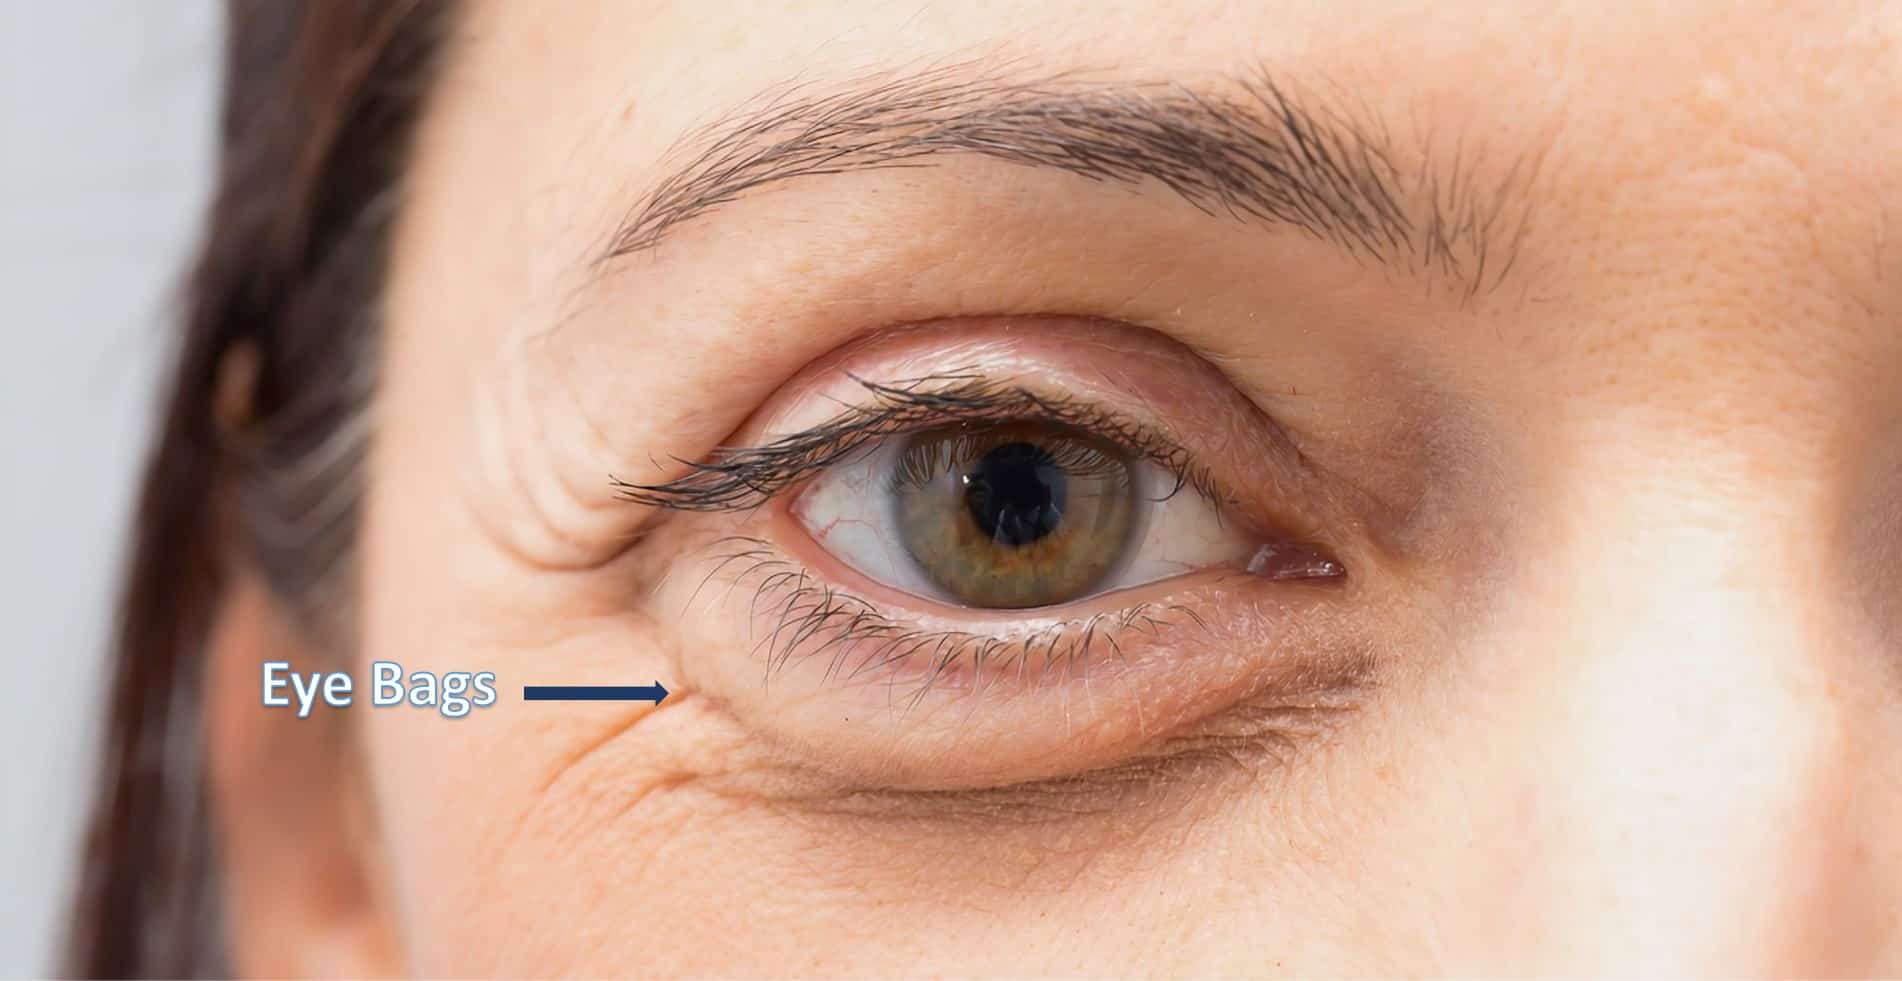 Eye bag surgery: Procedure, alternatives, cost, recovery, and more